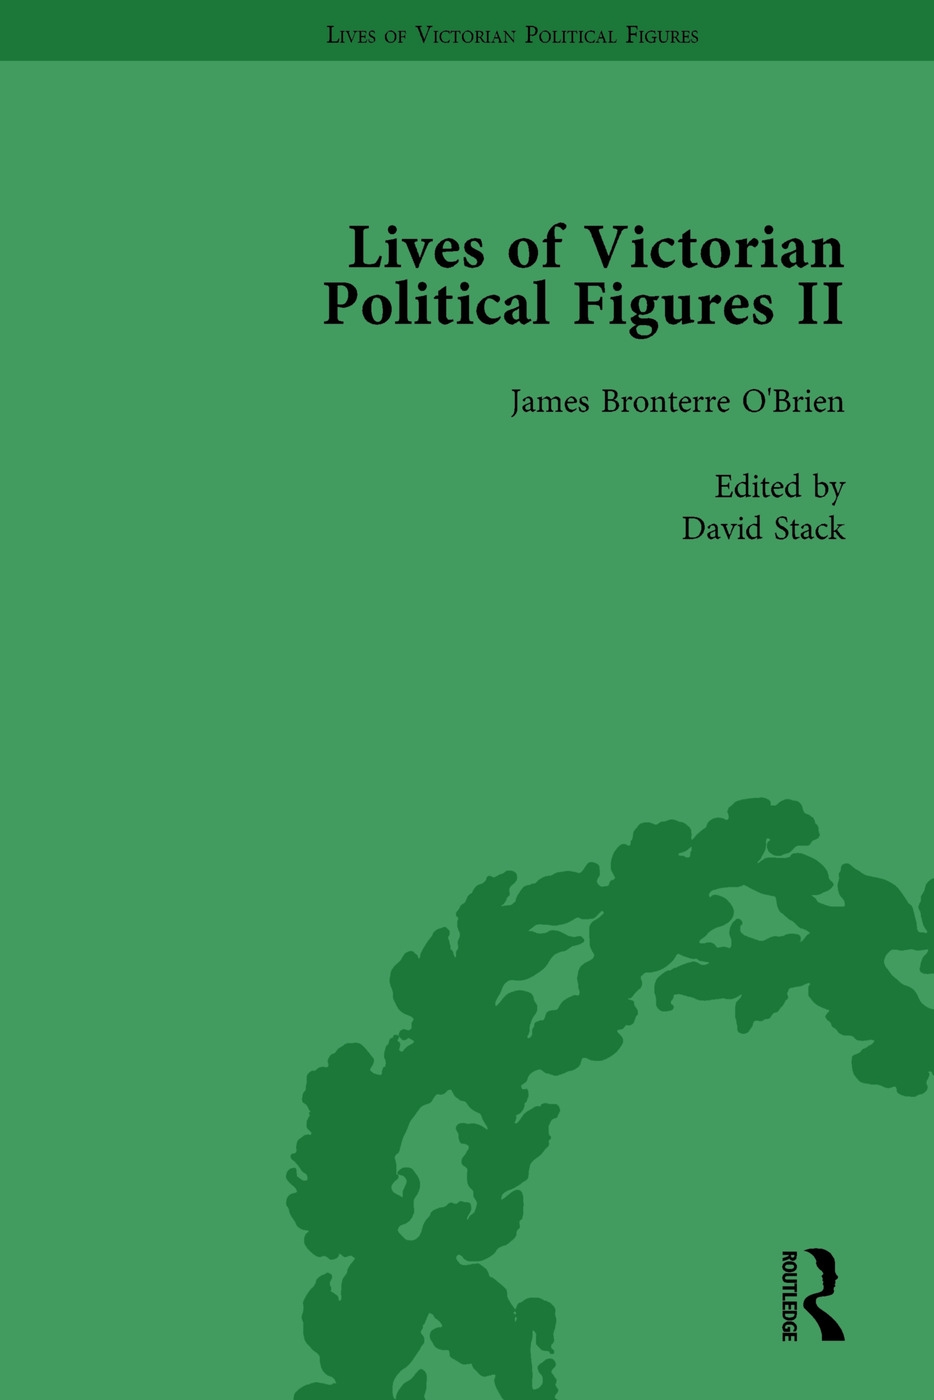 Lives of Victorian Political Figures, Part II, Volume 4: Daniel O’Connell, James Bronterre O’Brien, Charles Stewart Parnell and Michael Davitt by Thei